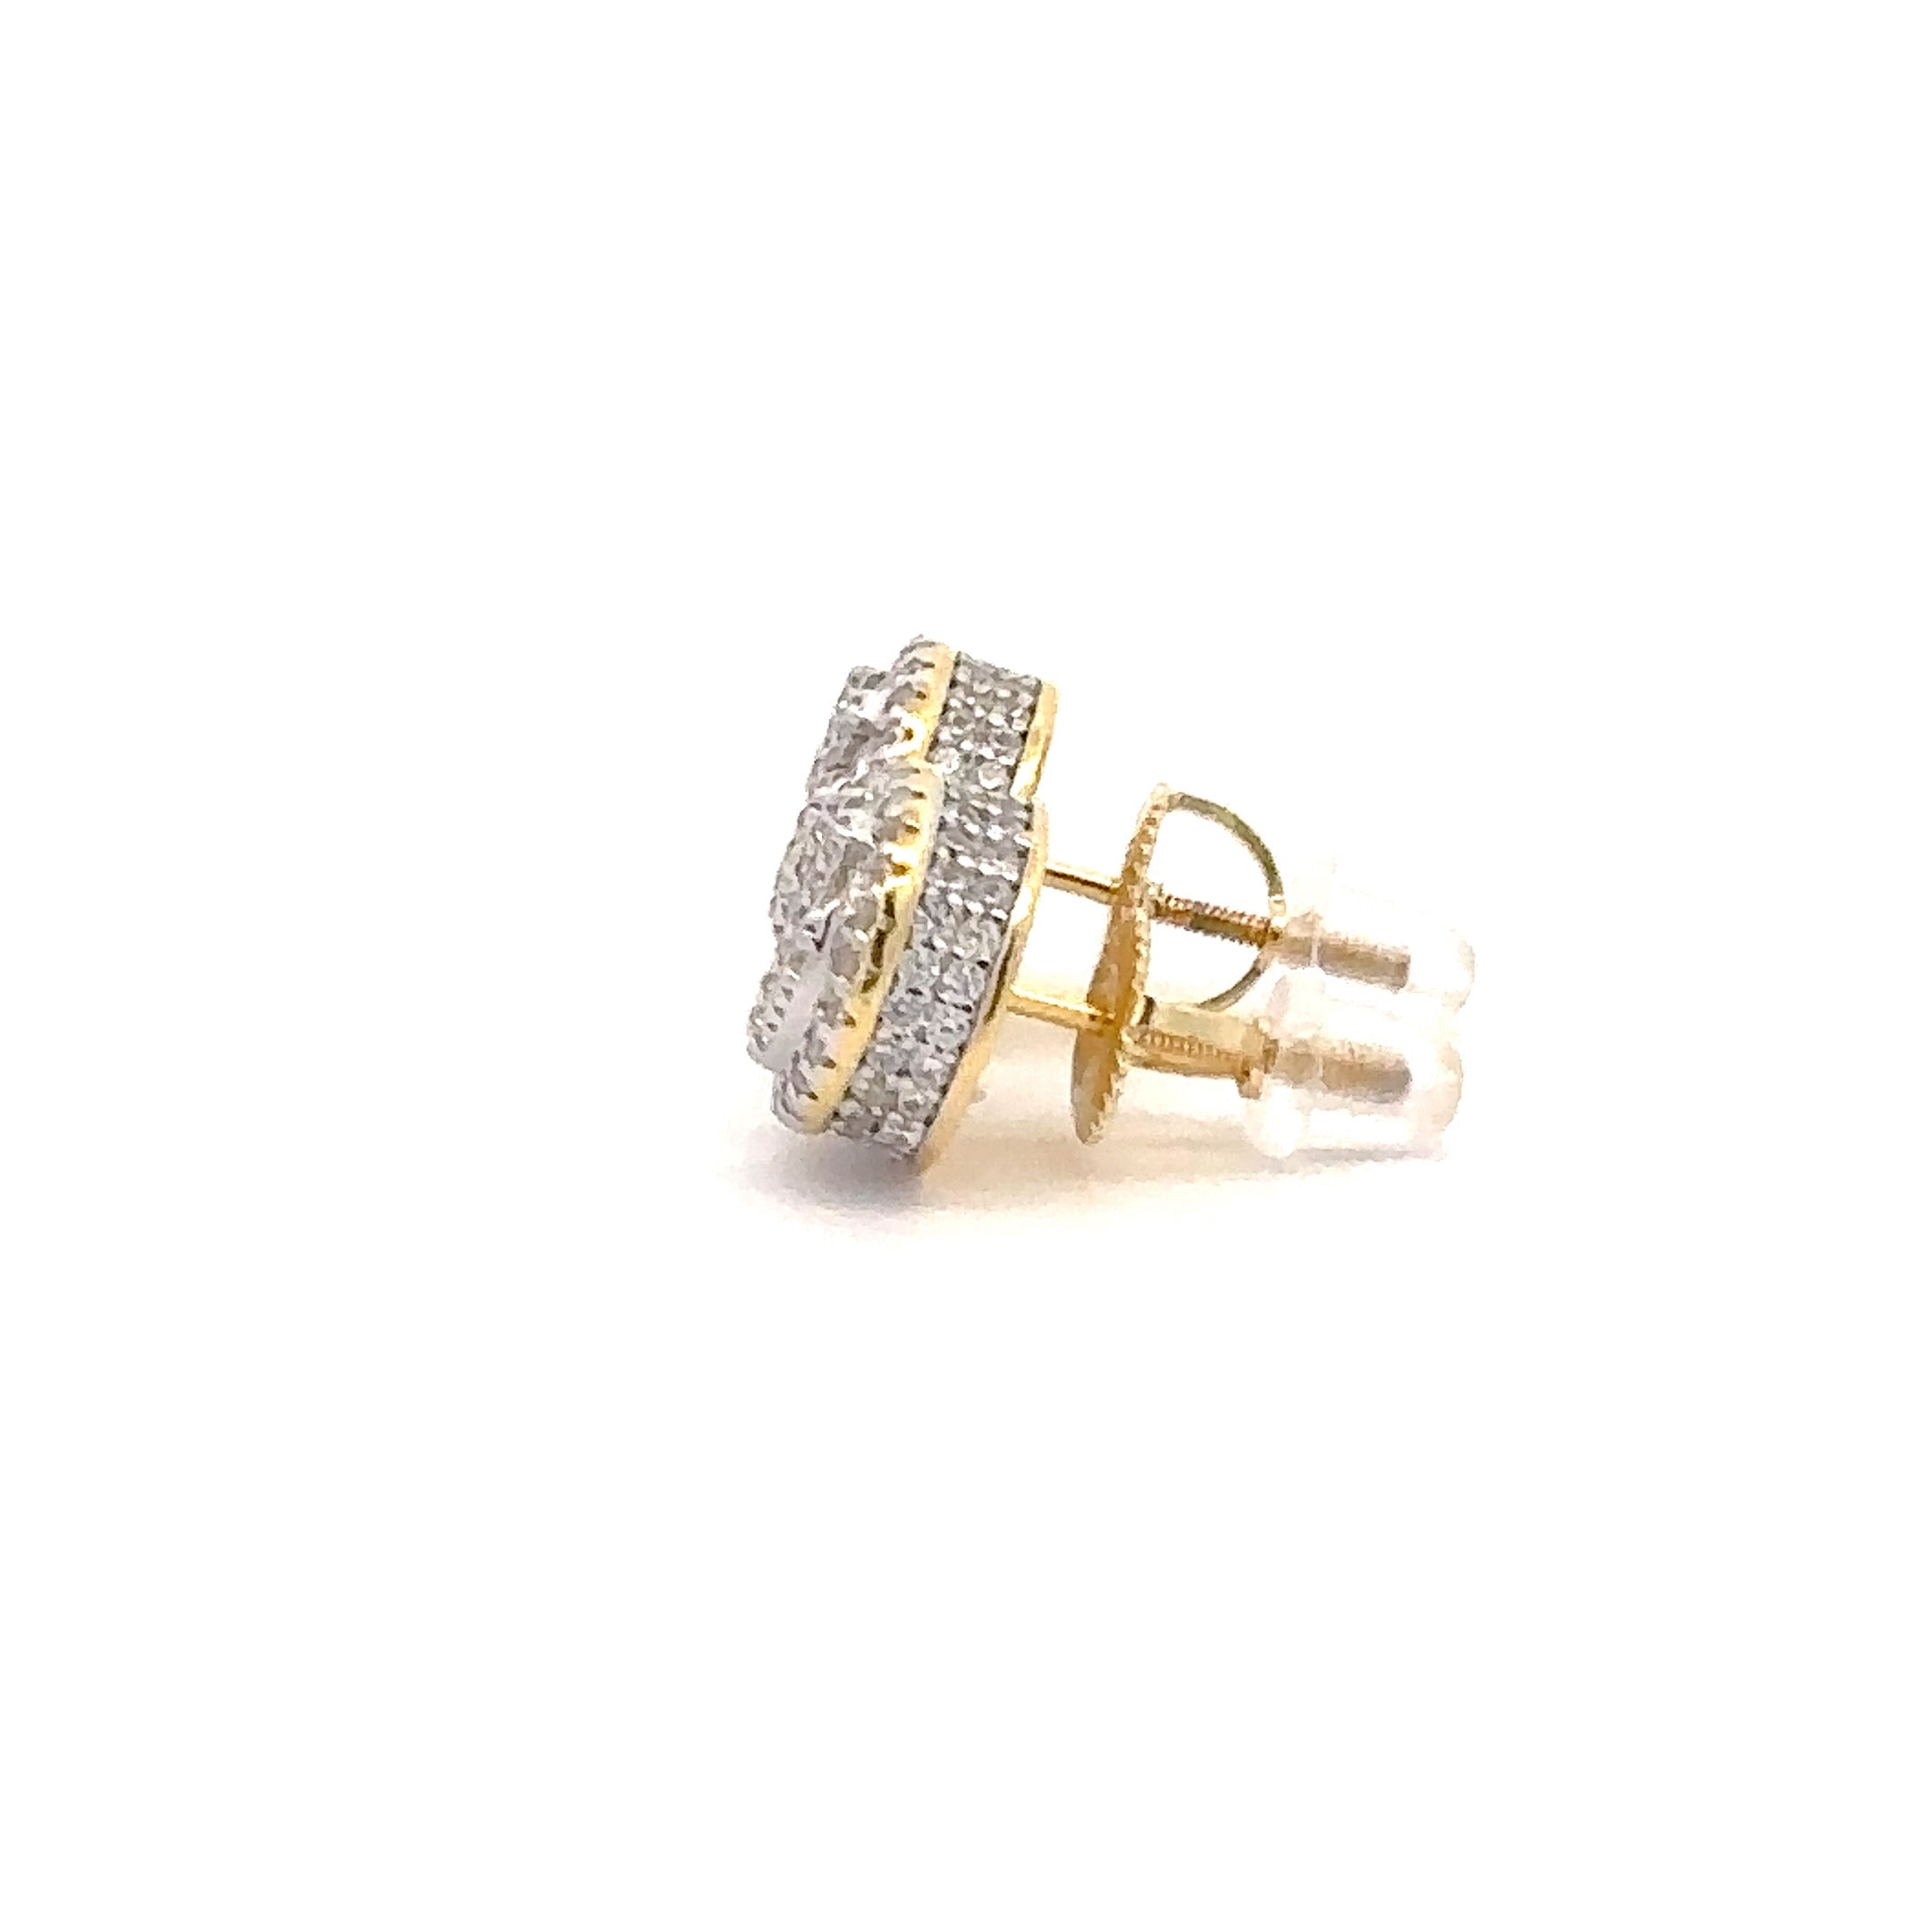 SOLARA 925 CZ GOLD ICED OUT EARRINGS | 9219552